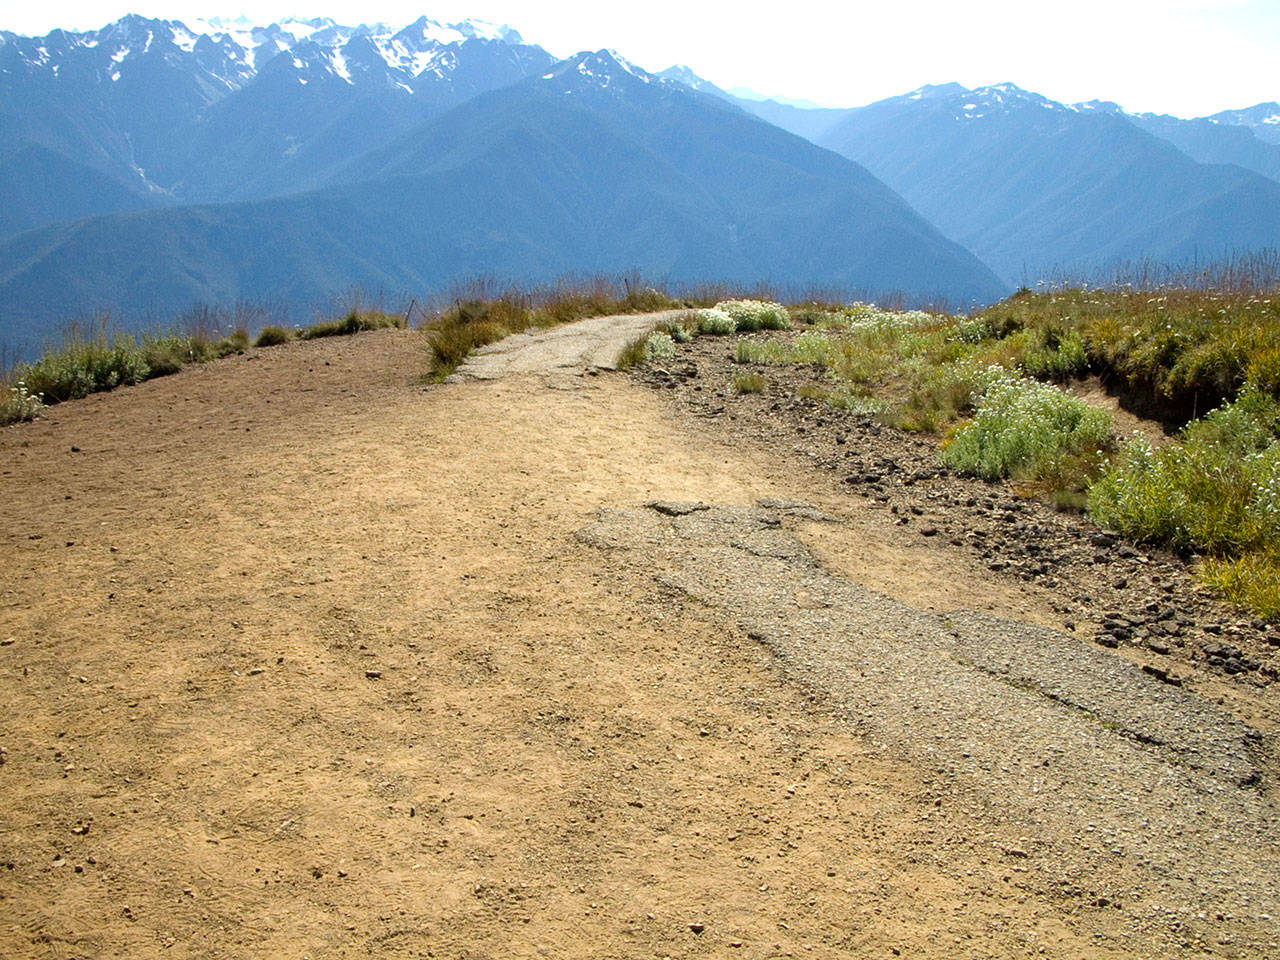 Olympic National Park will begin a rehabilitation project on Hurricane Hill Trail, a popular hike 1.6-mile hiketo the top of Hurricane Hill, on Monday with trail closures planned on a rotating basis over the summer. (Olympic National Park)